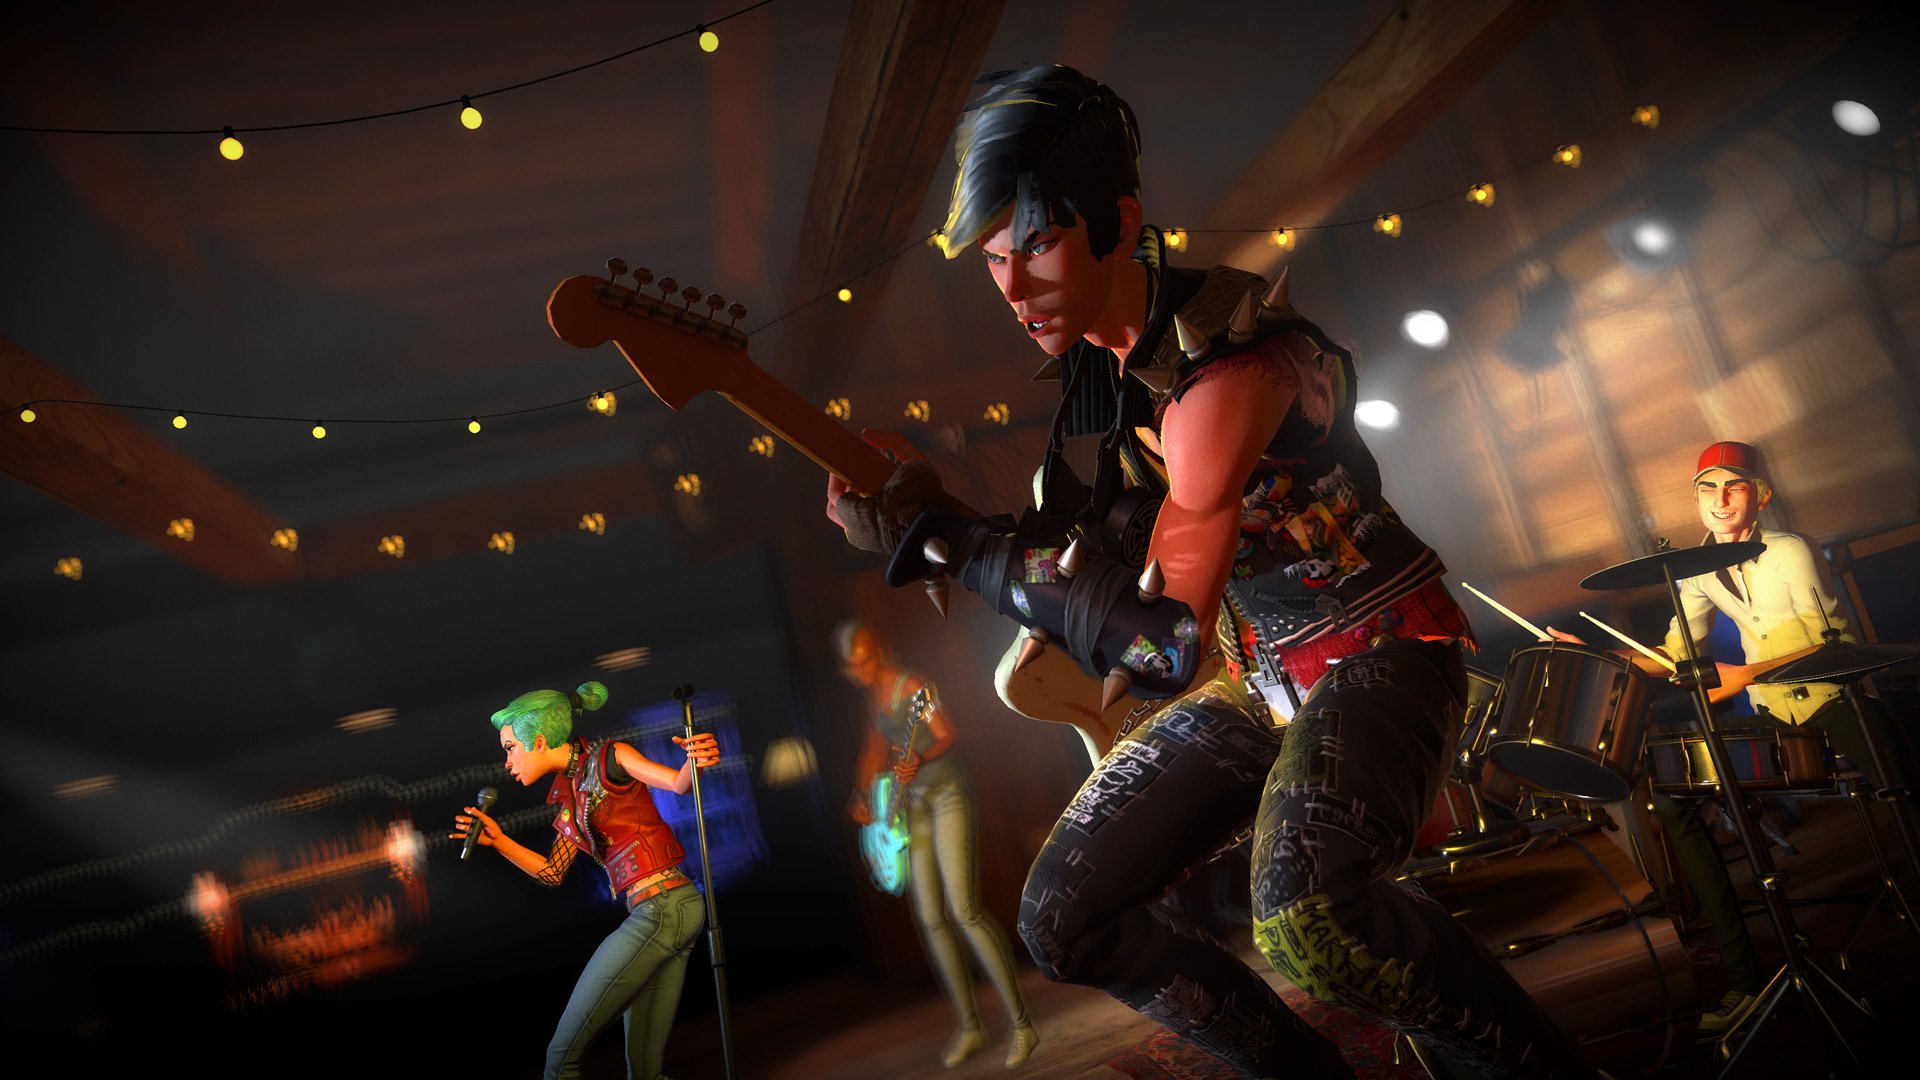 download rock band 4 ps4 for free